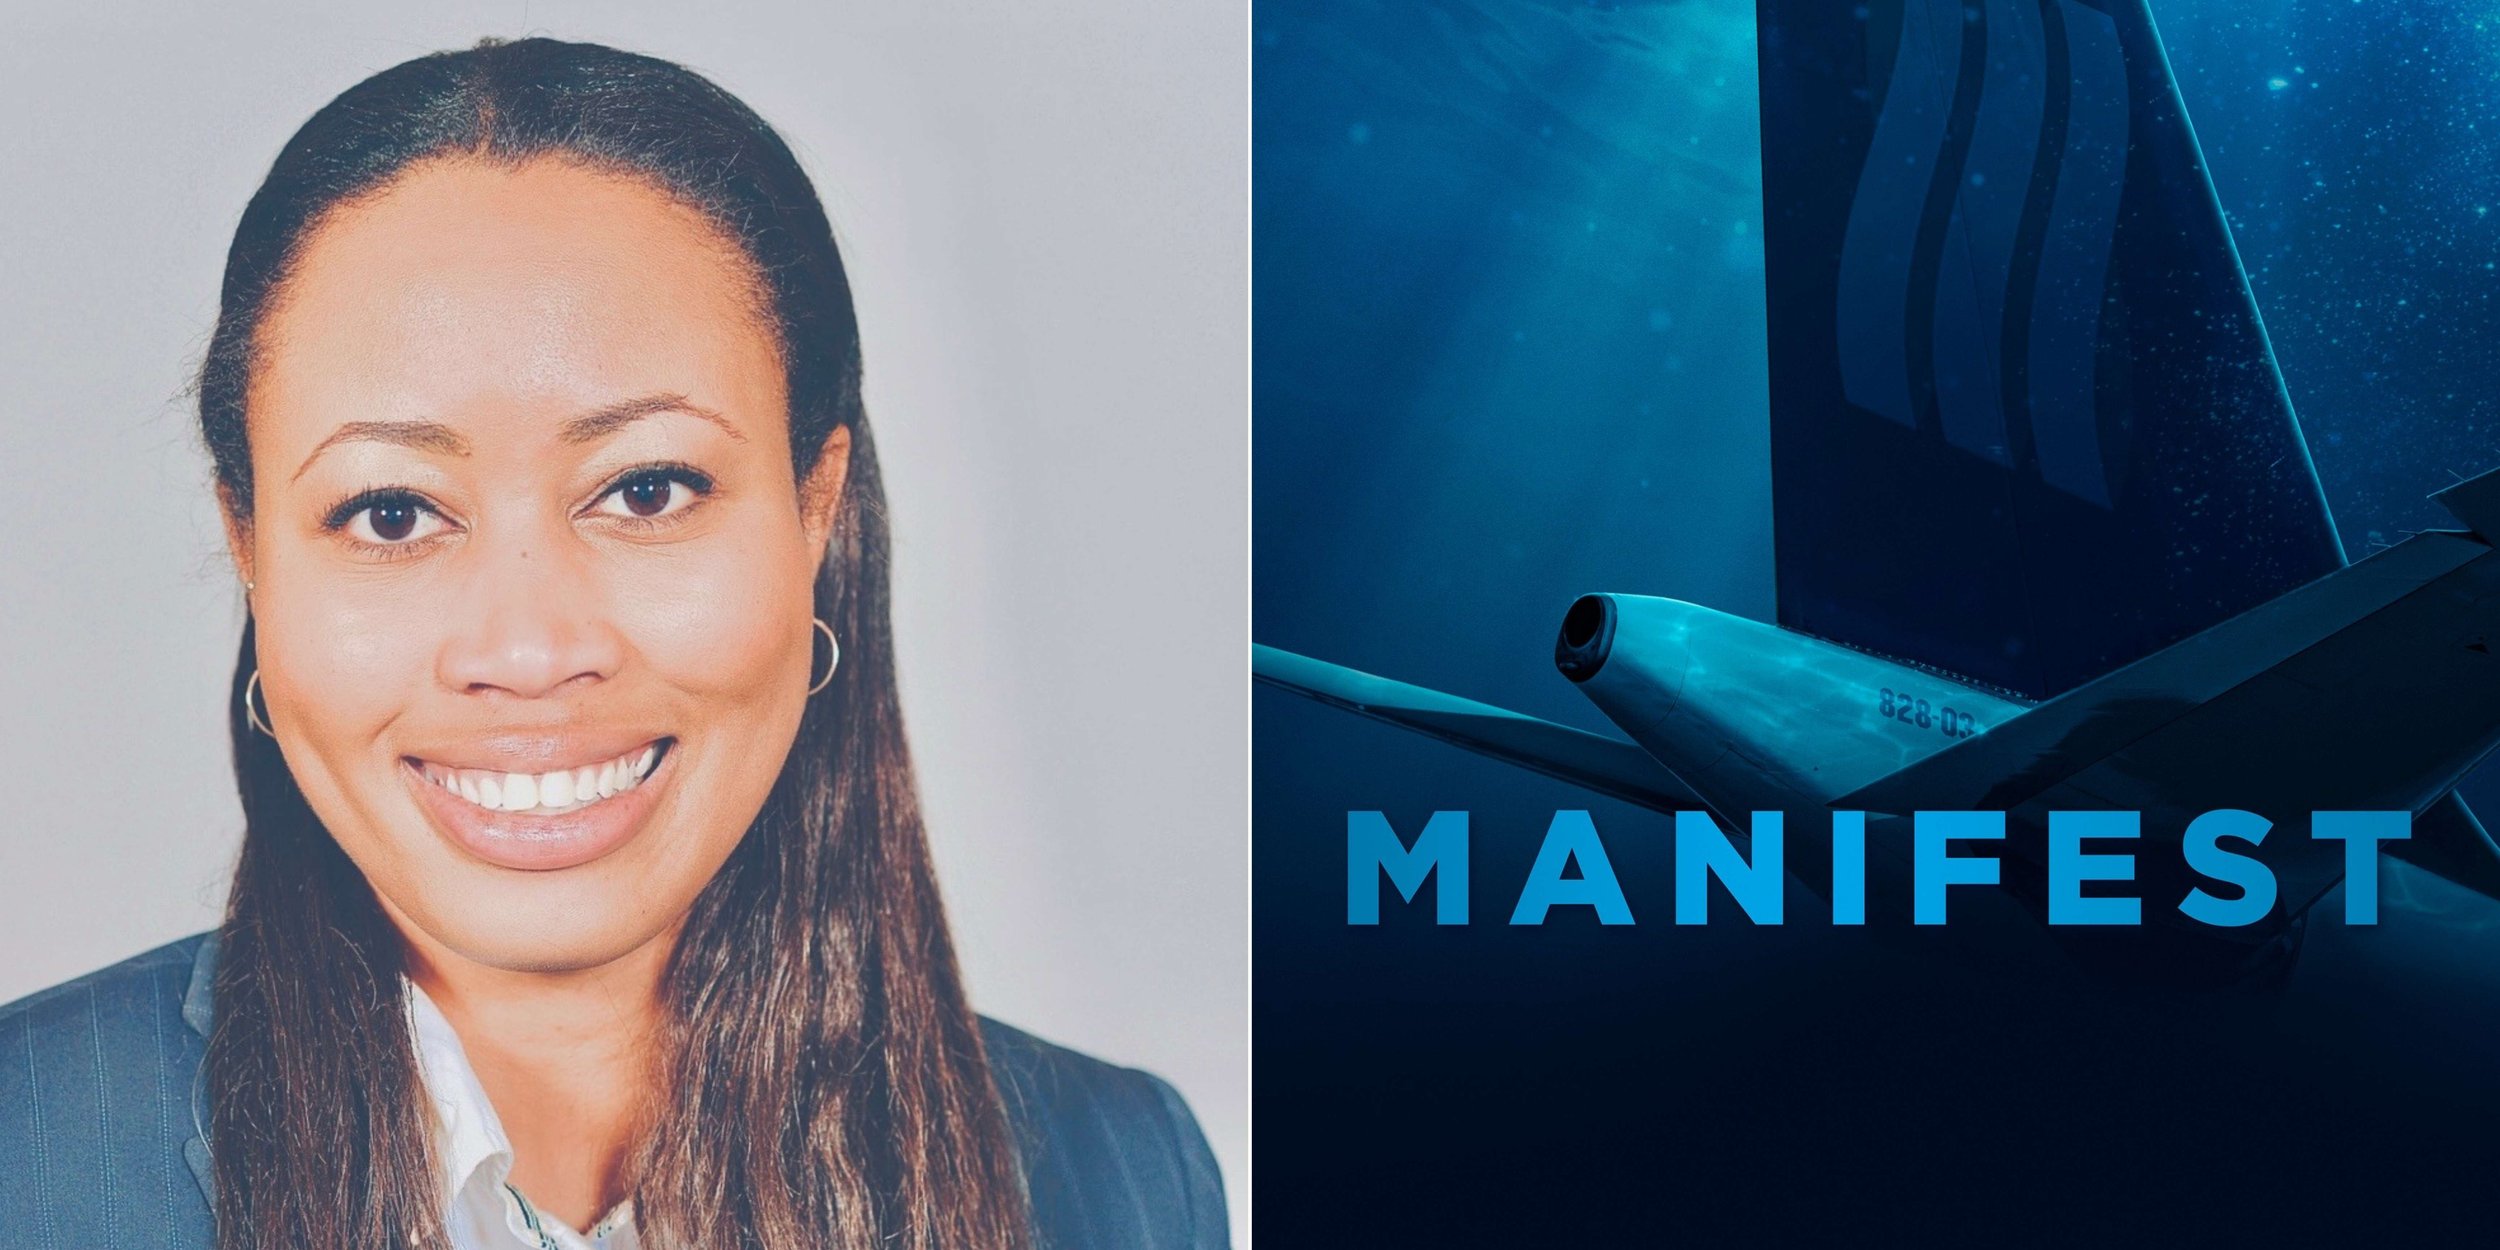  Morgan Webber-Ottey was hired as a Script Coordinator for  Manifest .  